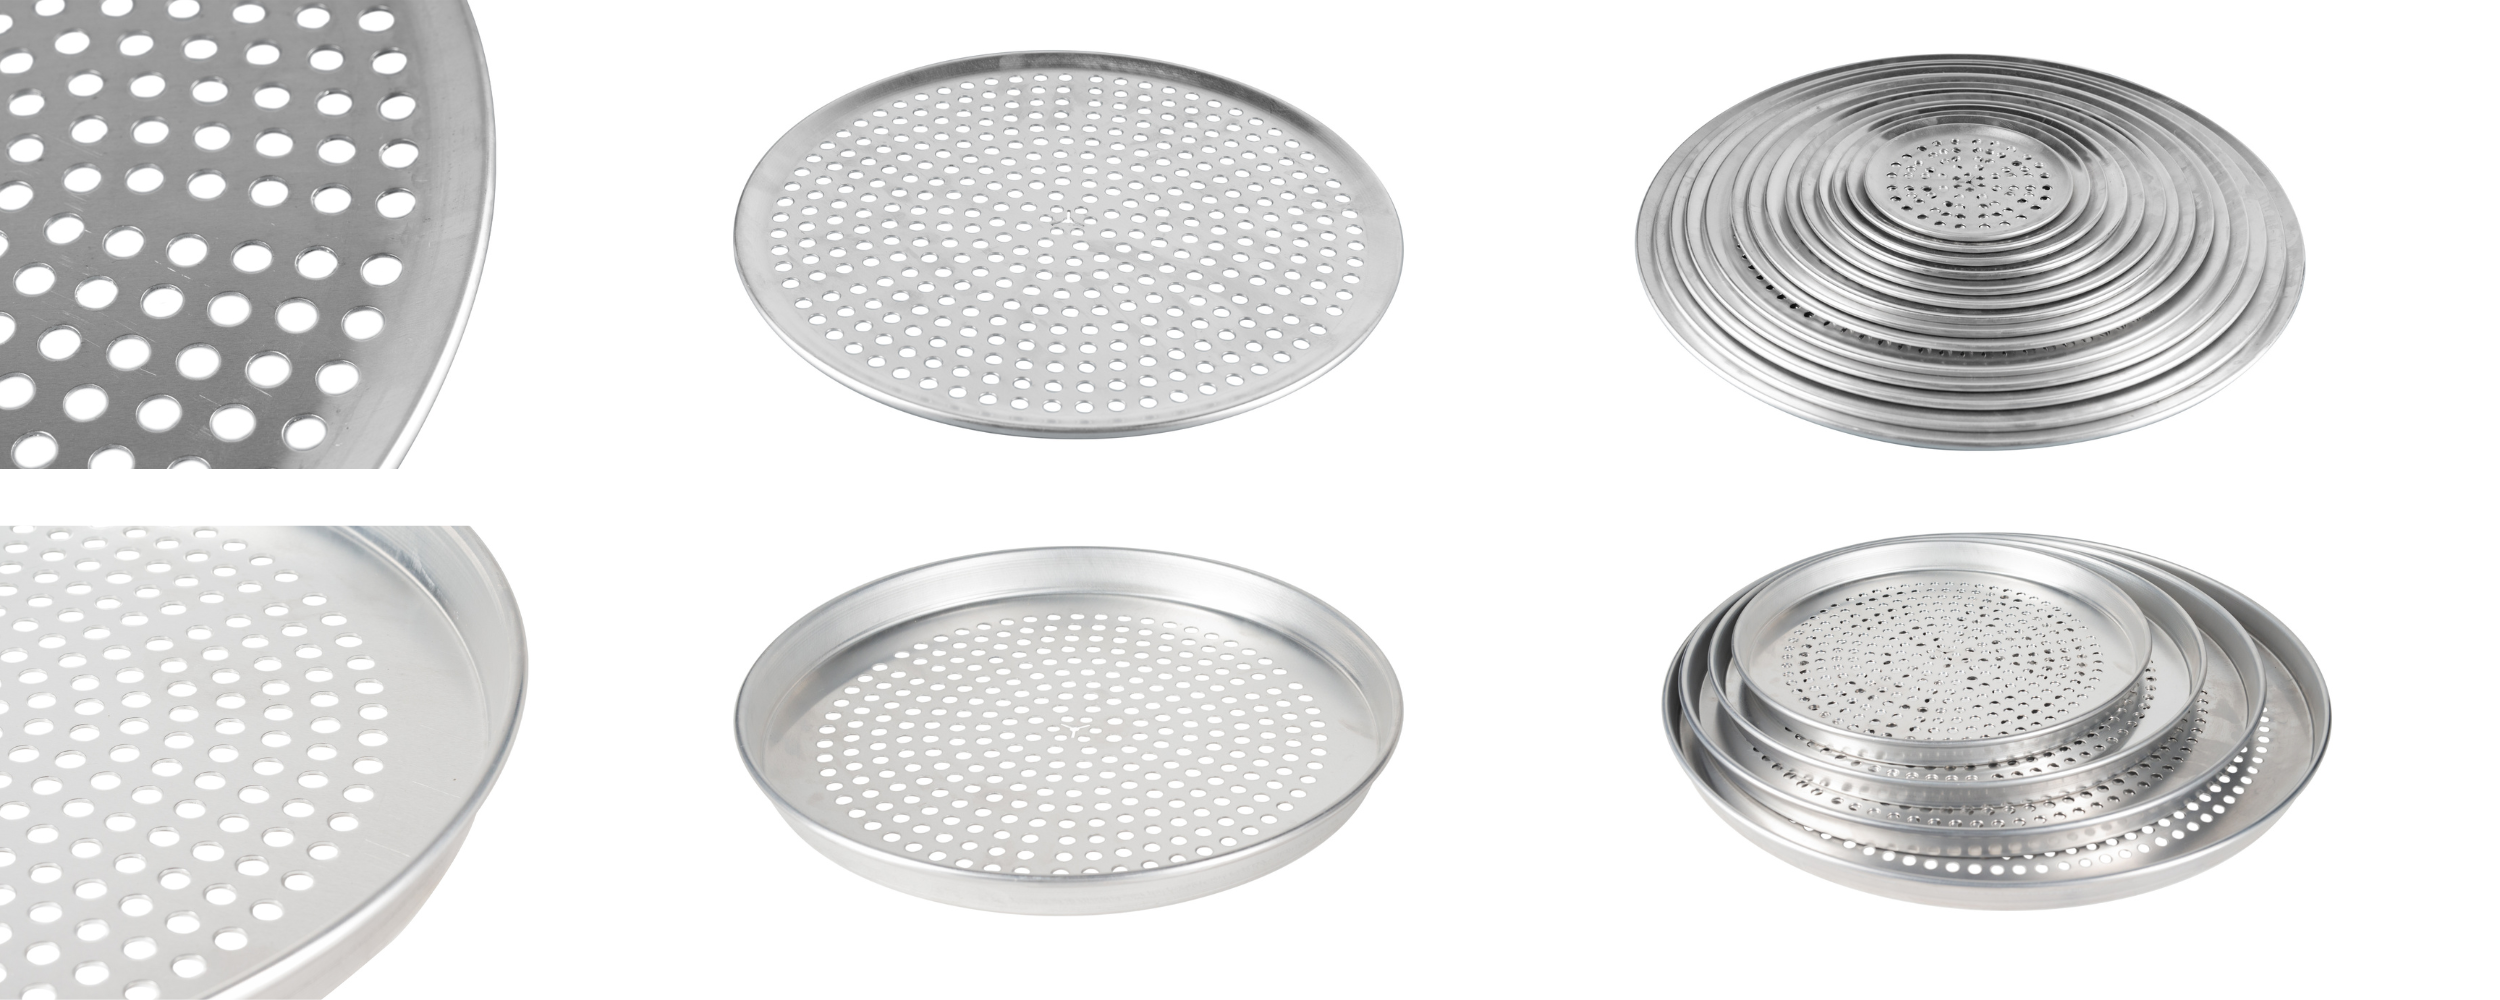 Styles of perforated pizza pans